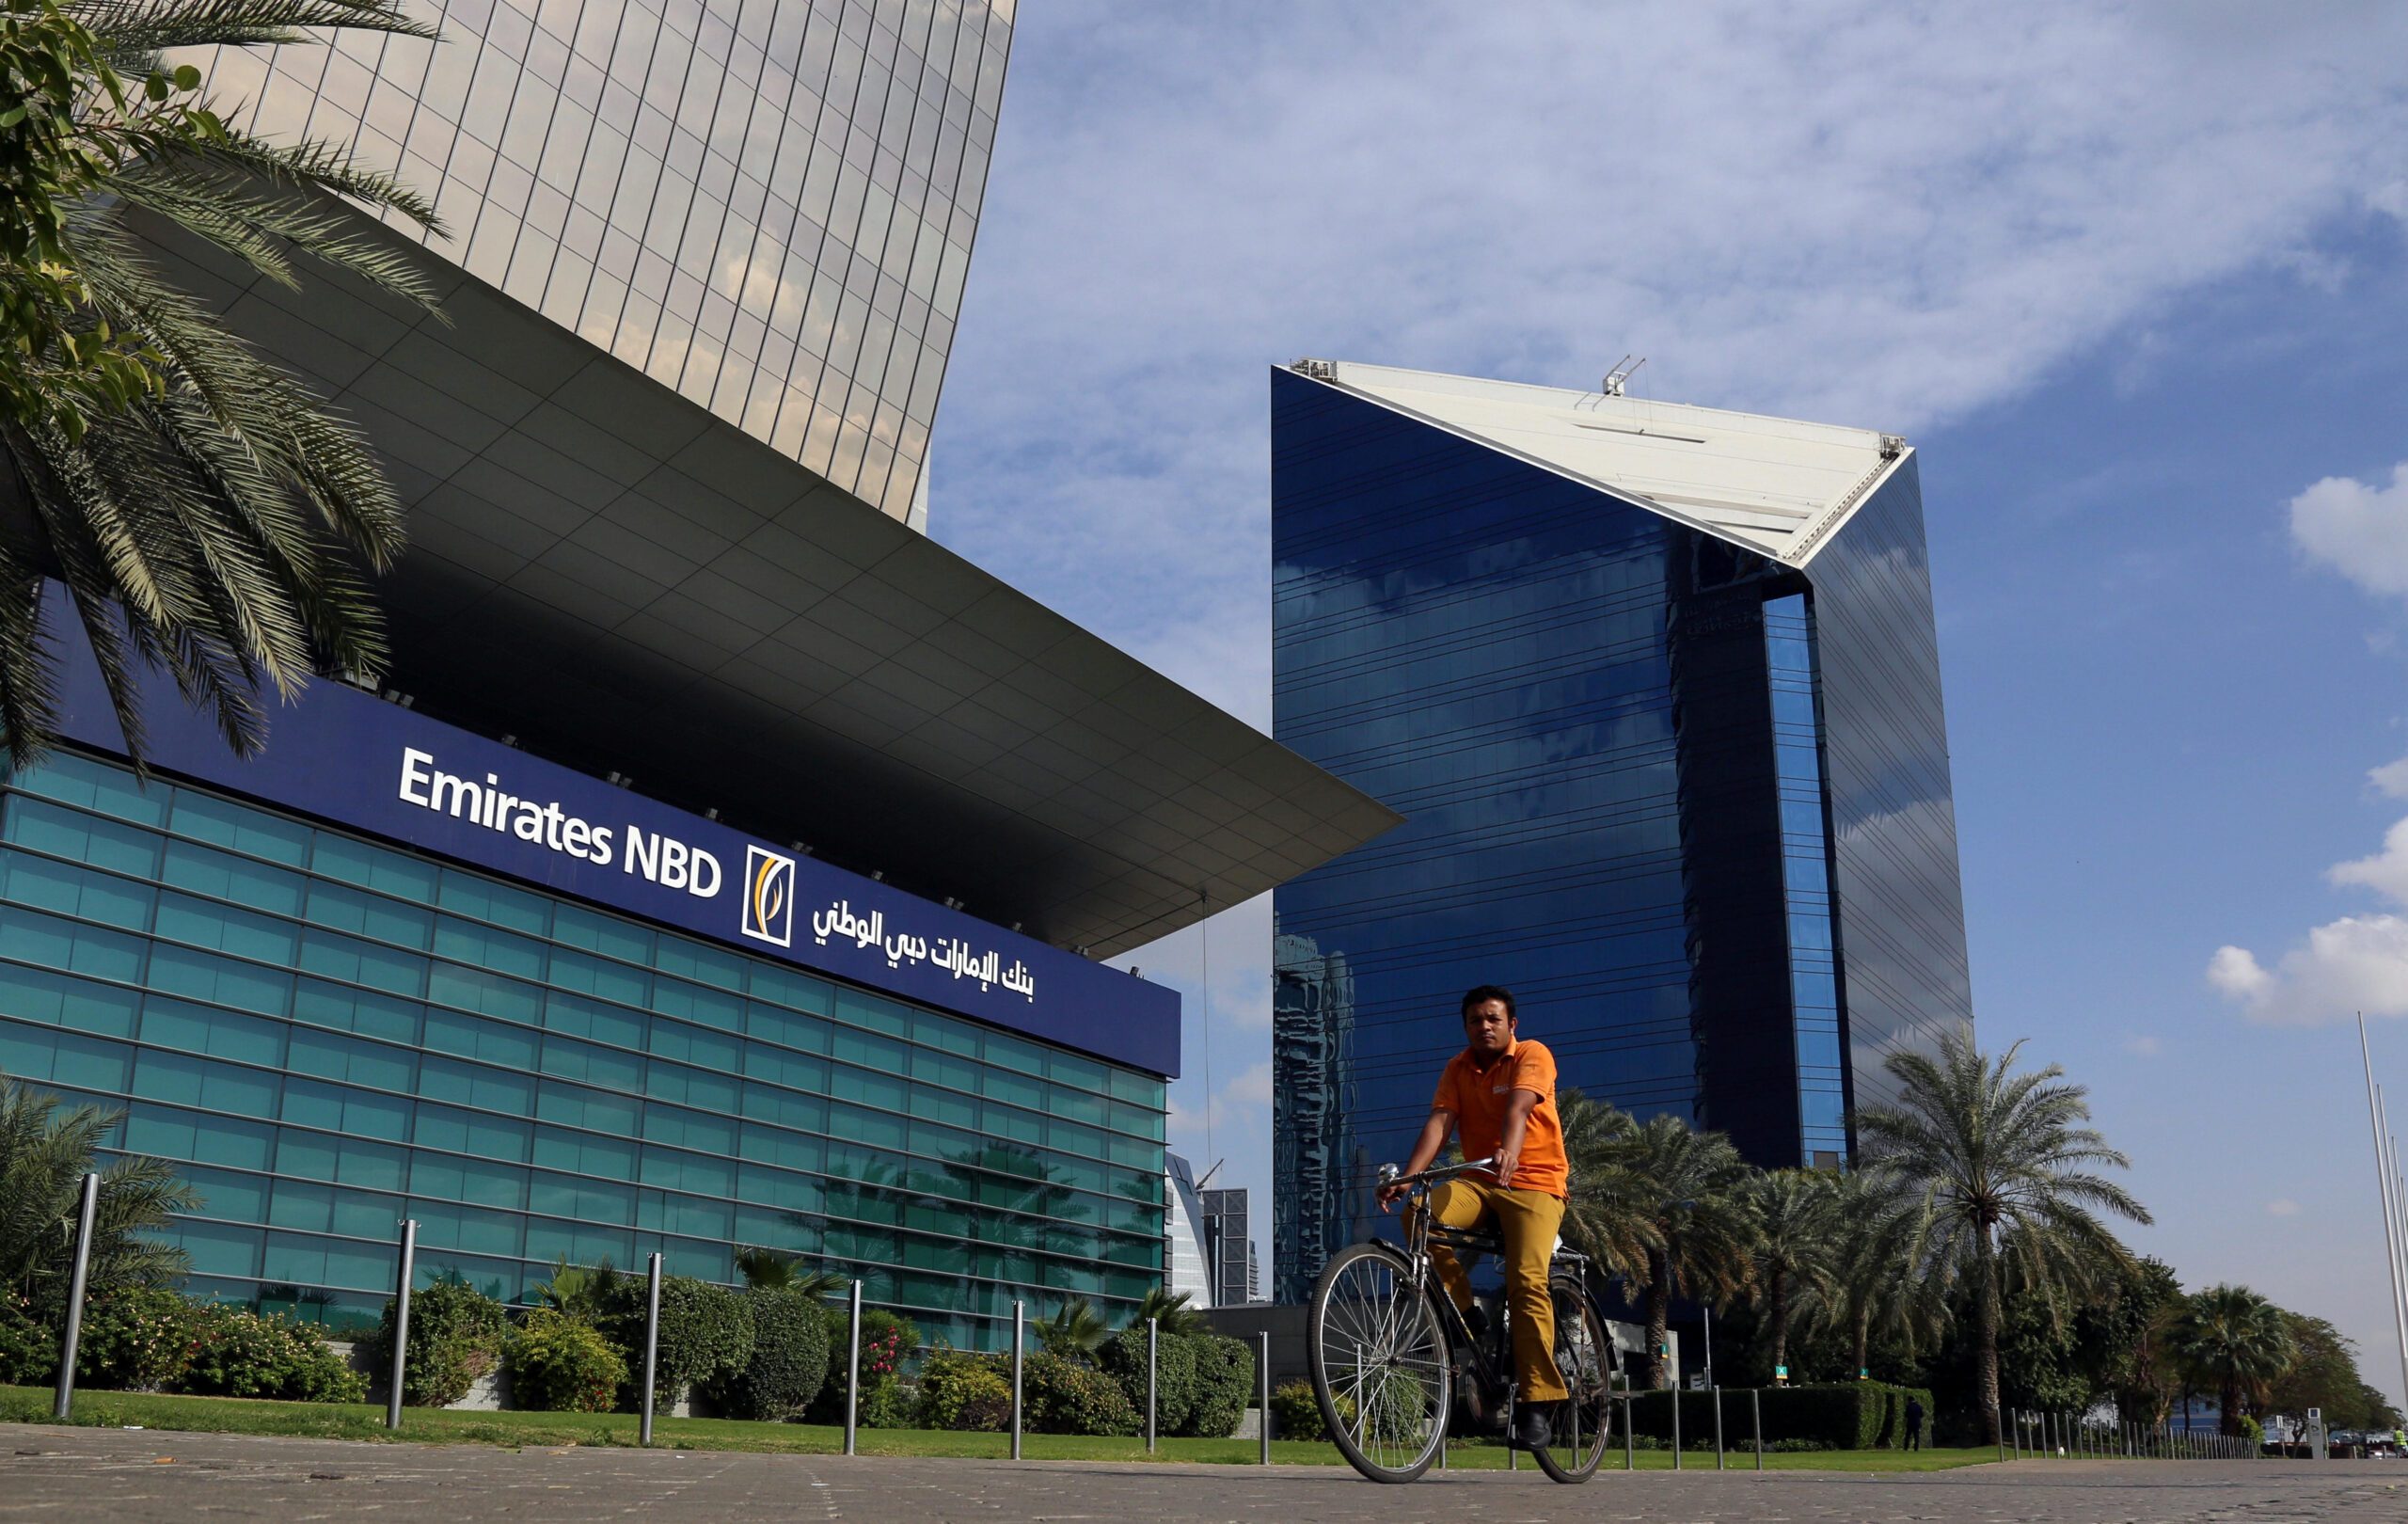 A man rides a bicycle past bank Emirates NBD head office in Dubai, UAE